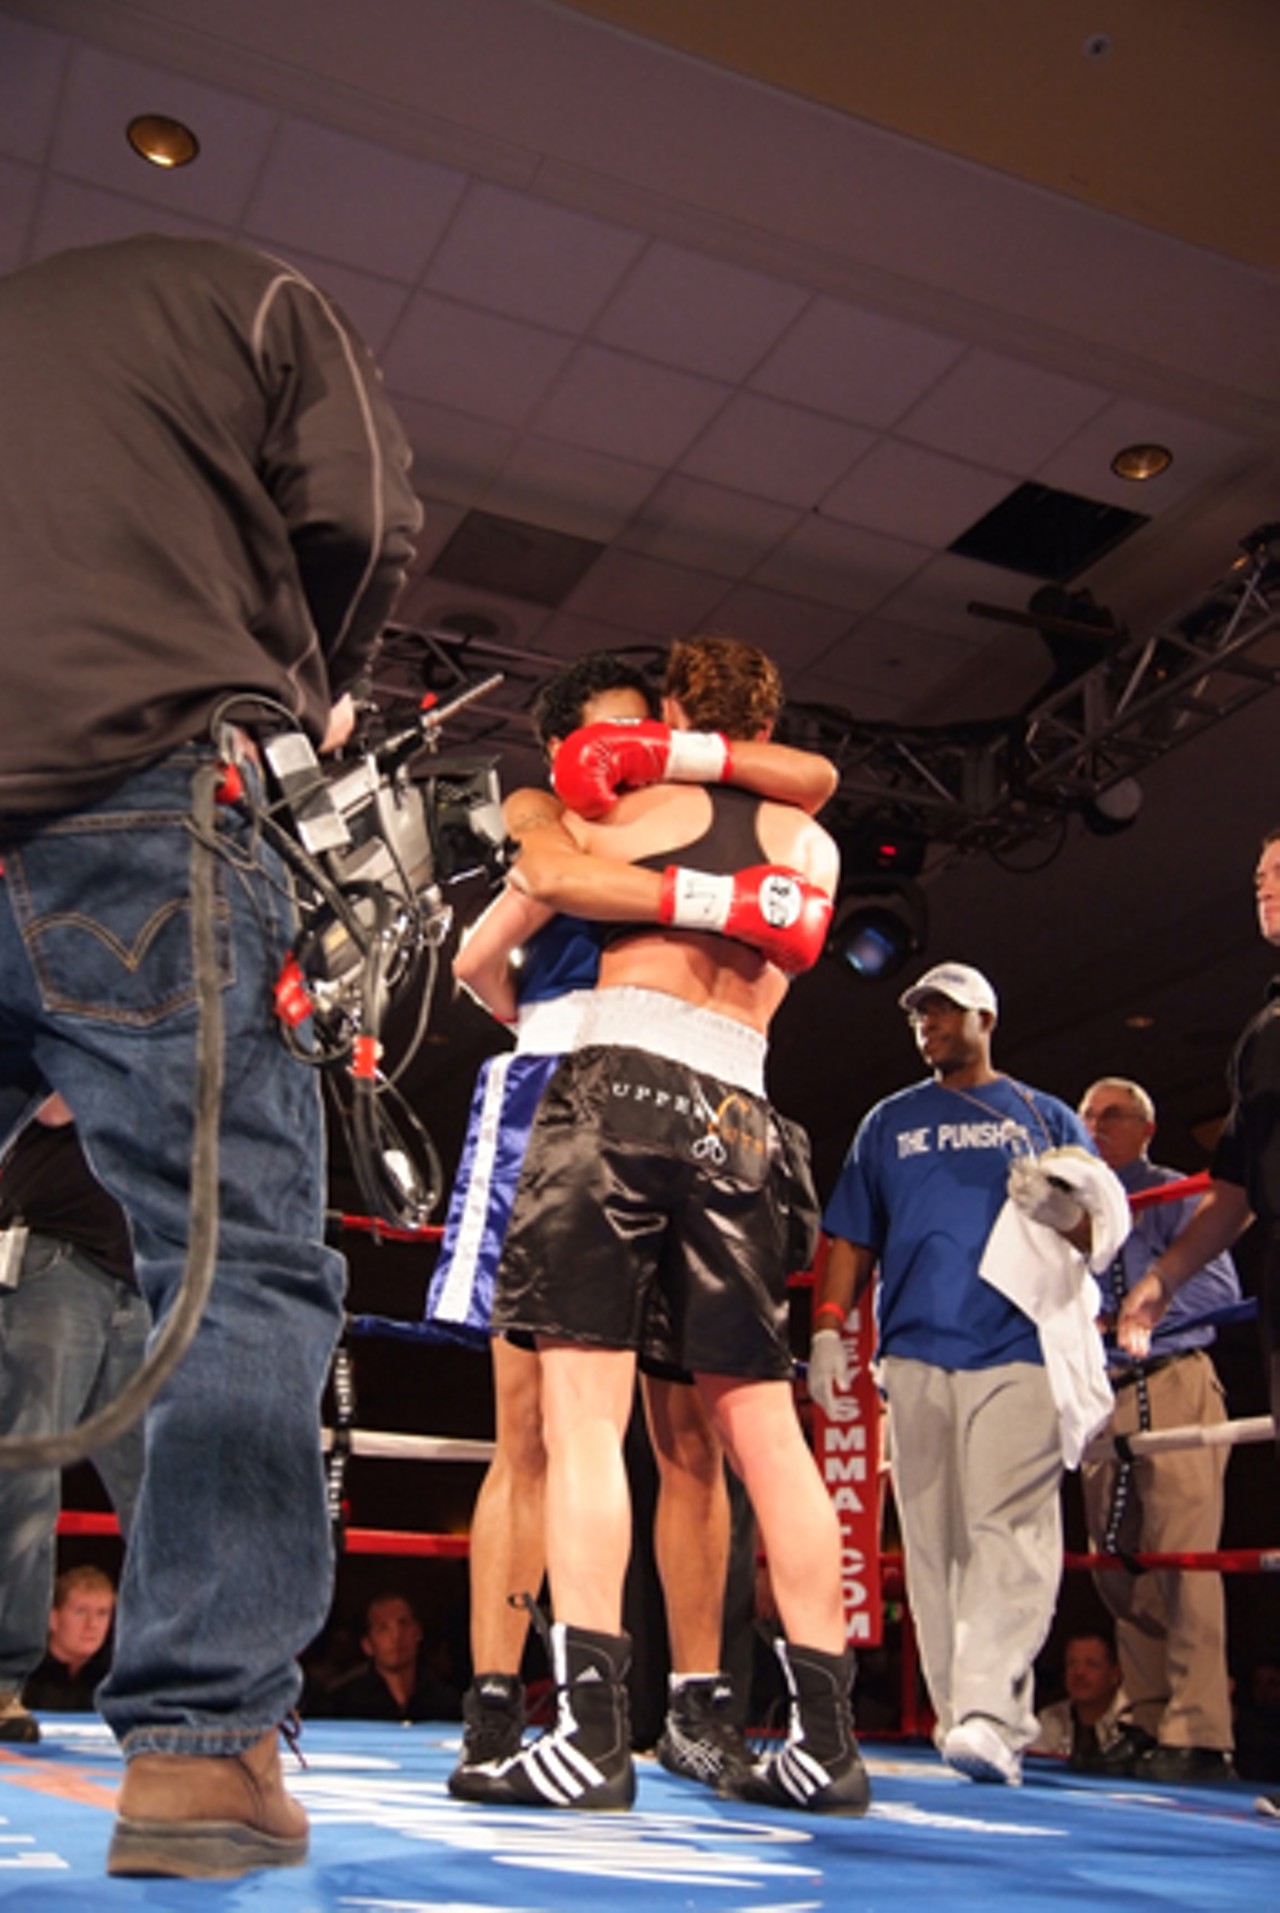 O'Hare and Hamlett hug in the ring after the fight. Neighter fighter went down during the match, which ended in -- a draw.